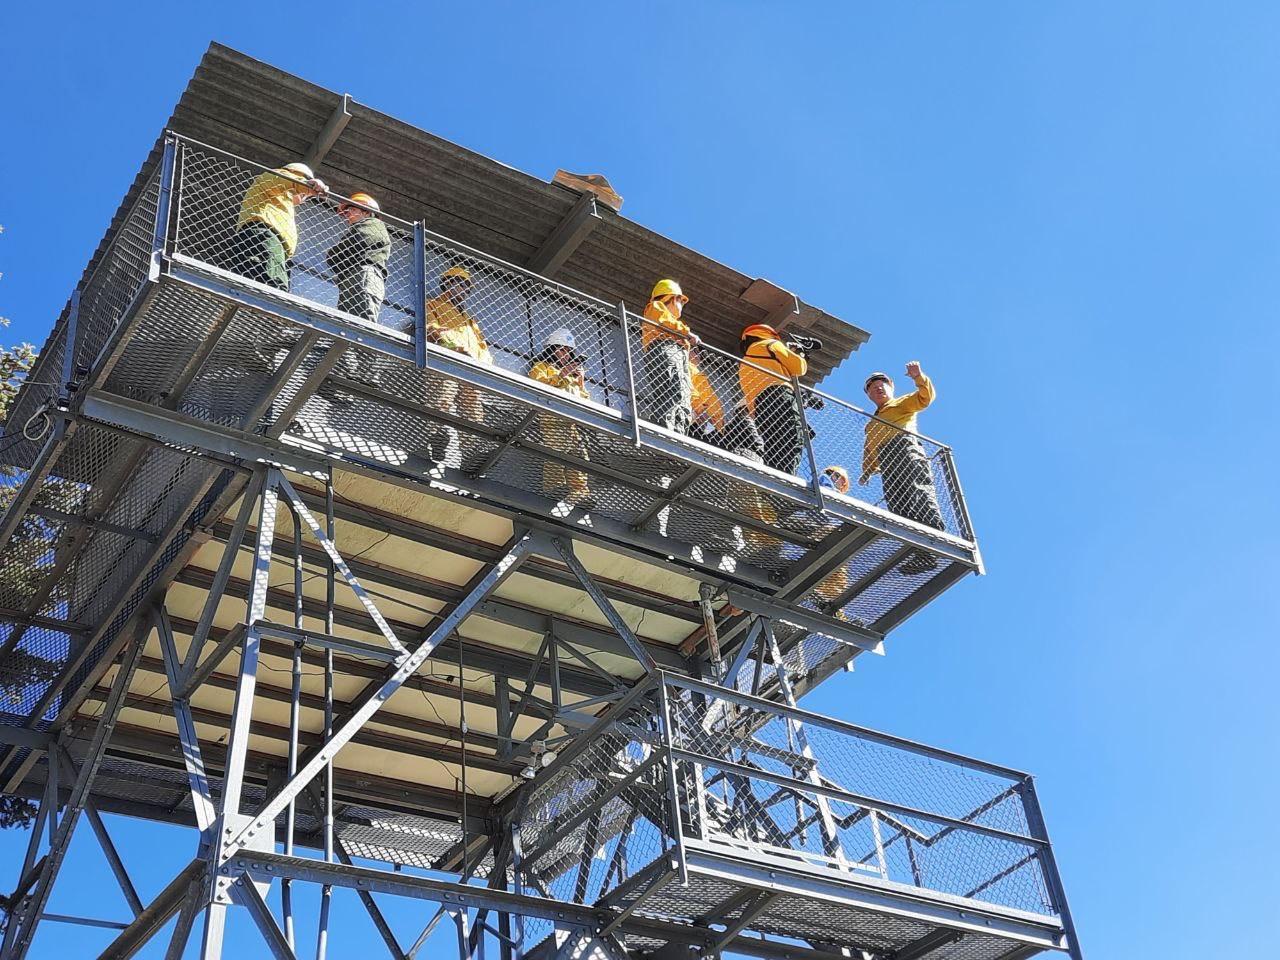 10 people wearing yellow and green clothes are standing on a catwalk of a metal fire tower